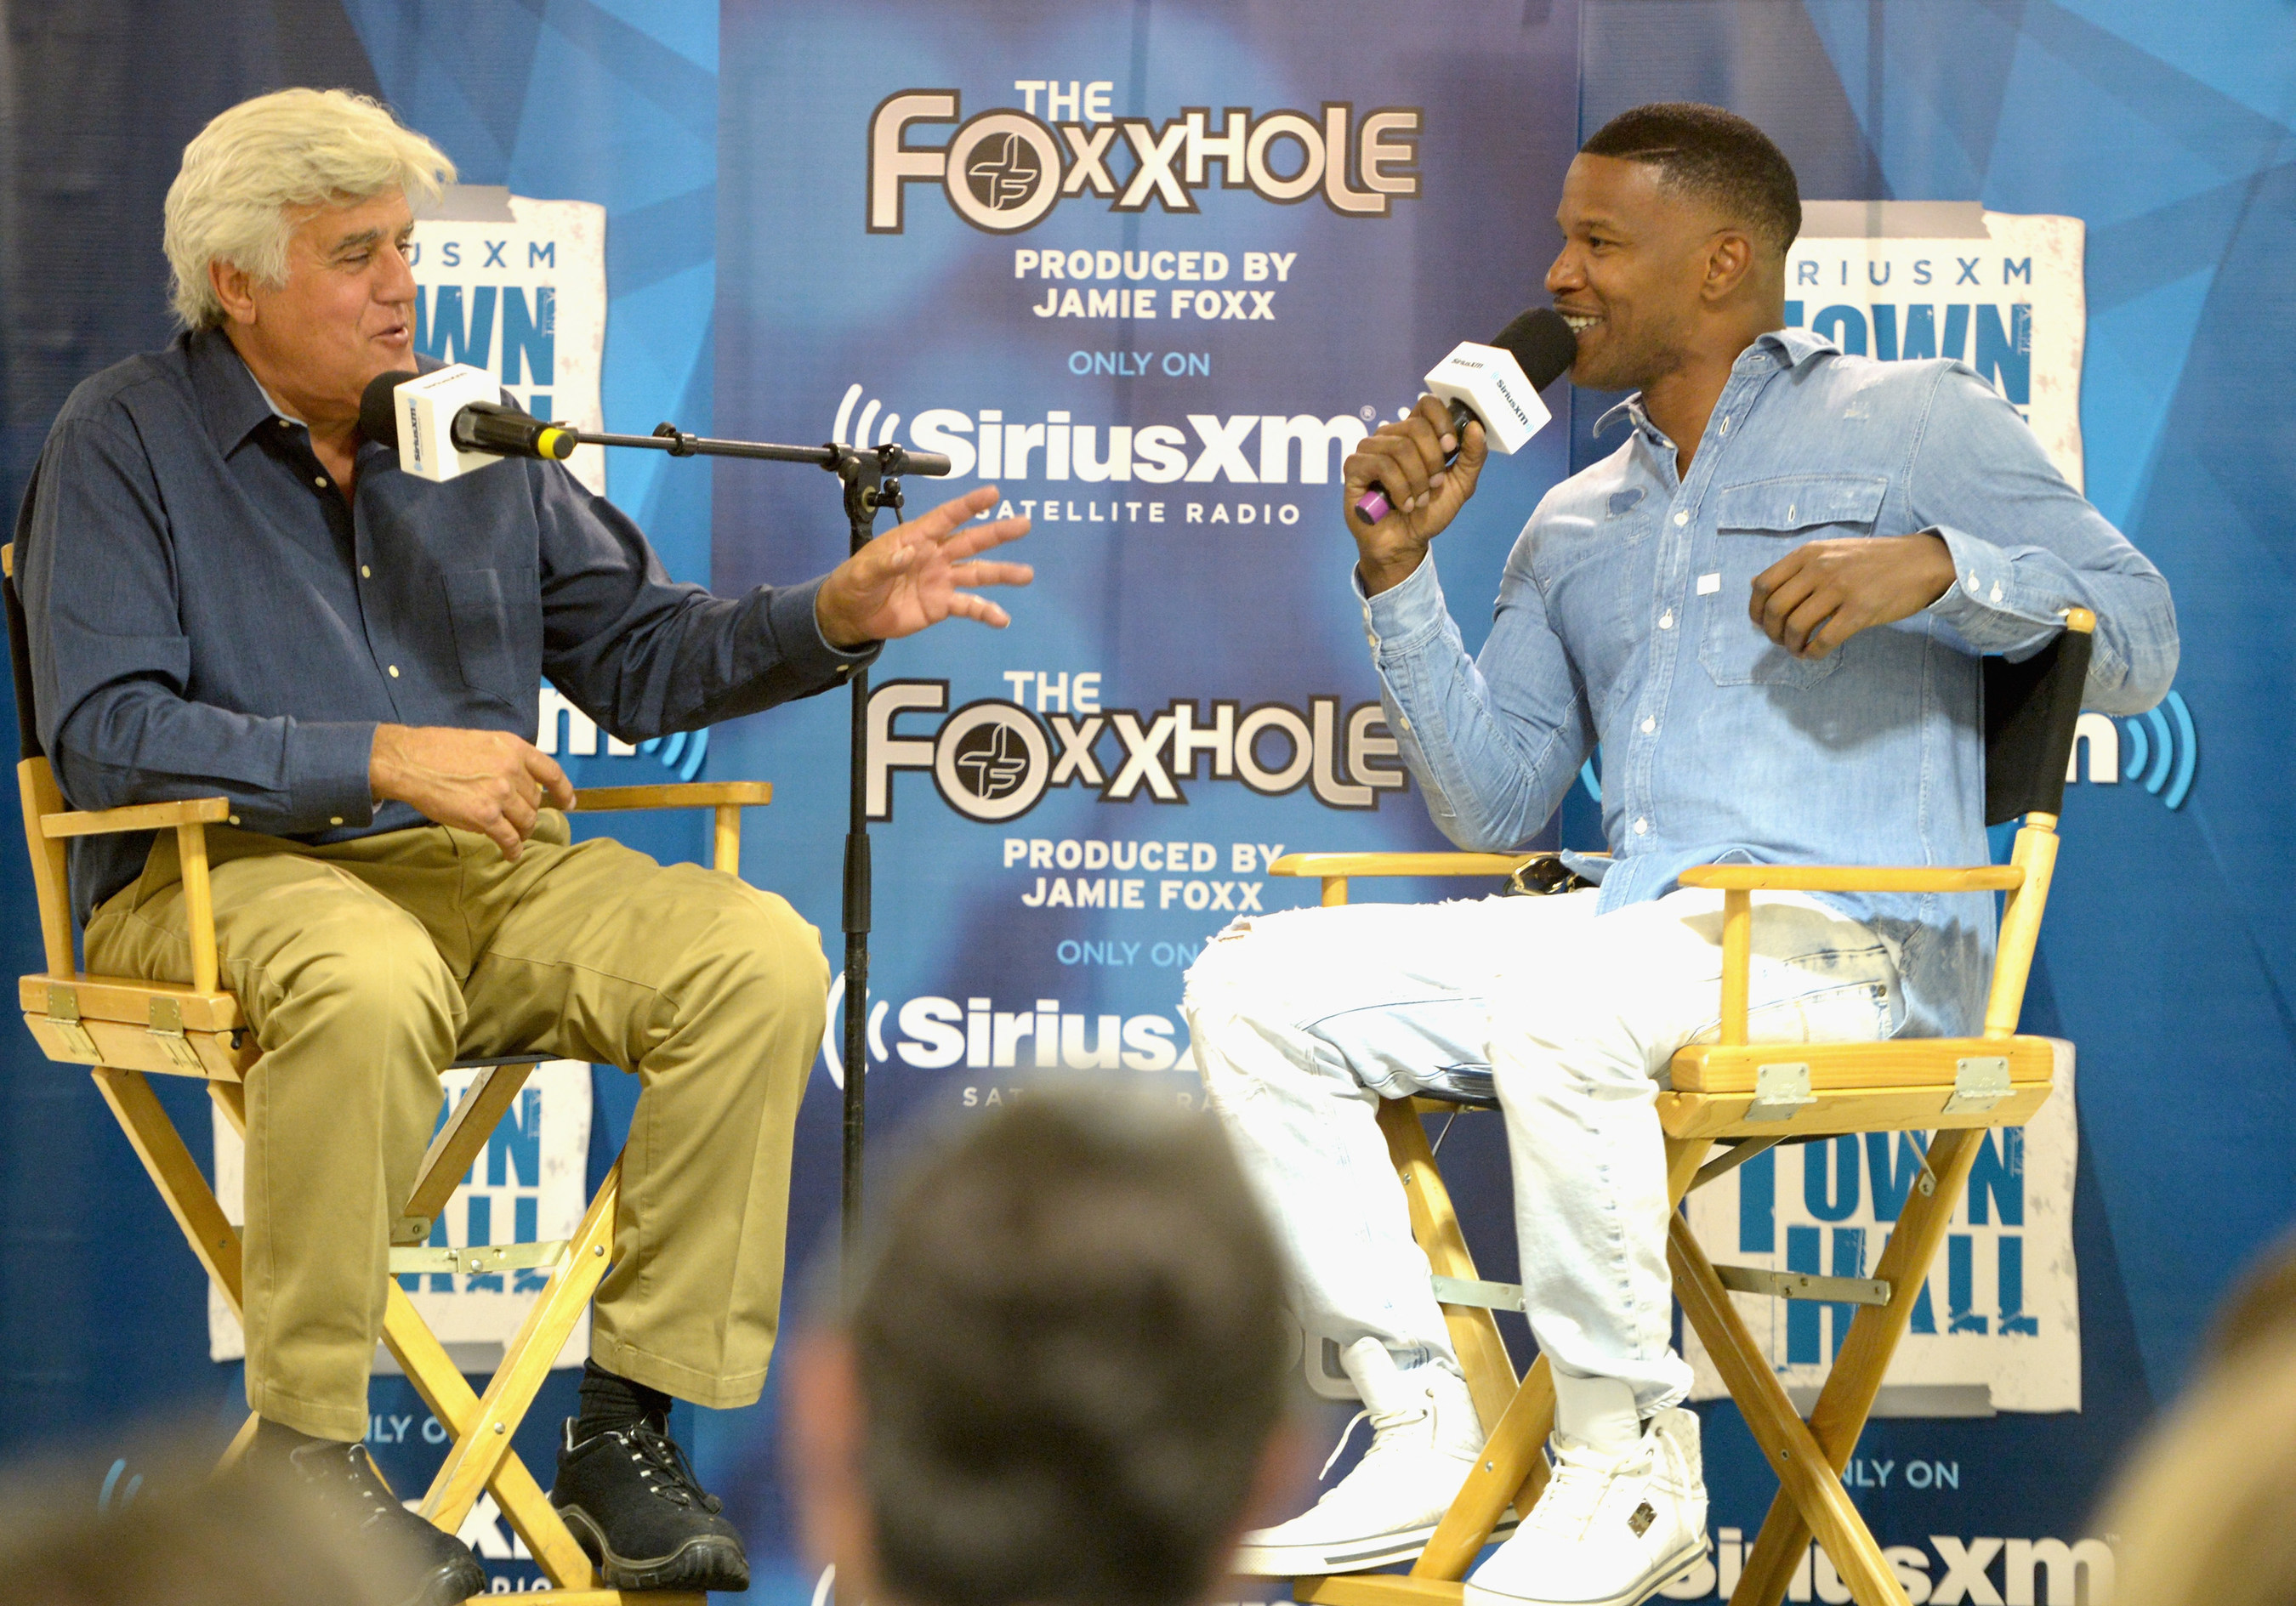 Jay Leno Goes One-on-One with Jamie Foxx for In-Depth Q&A Session as Part of SiriusXM's Town Hall Series